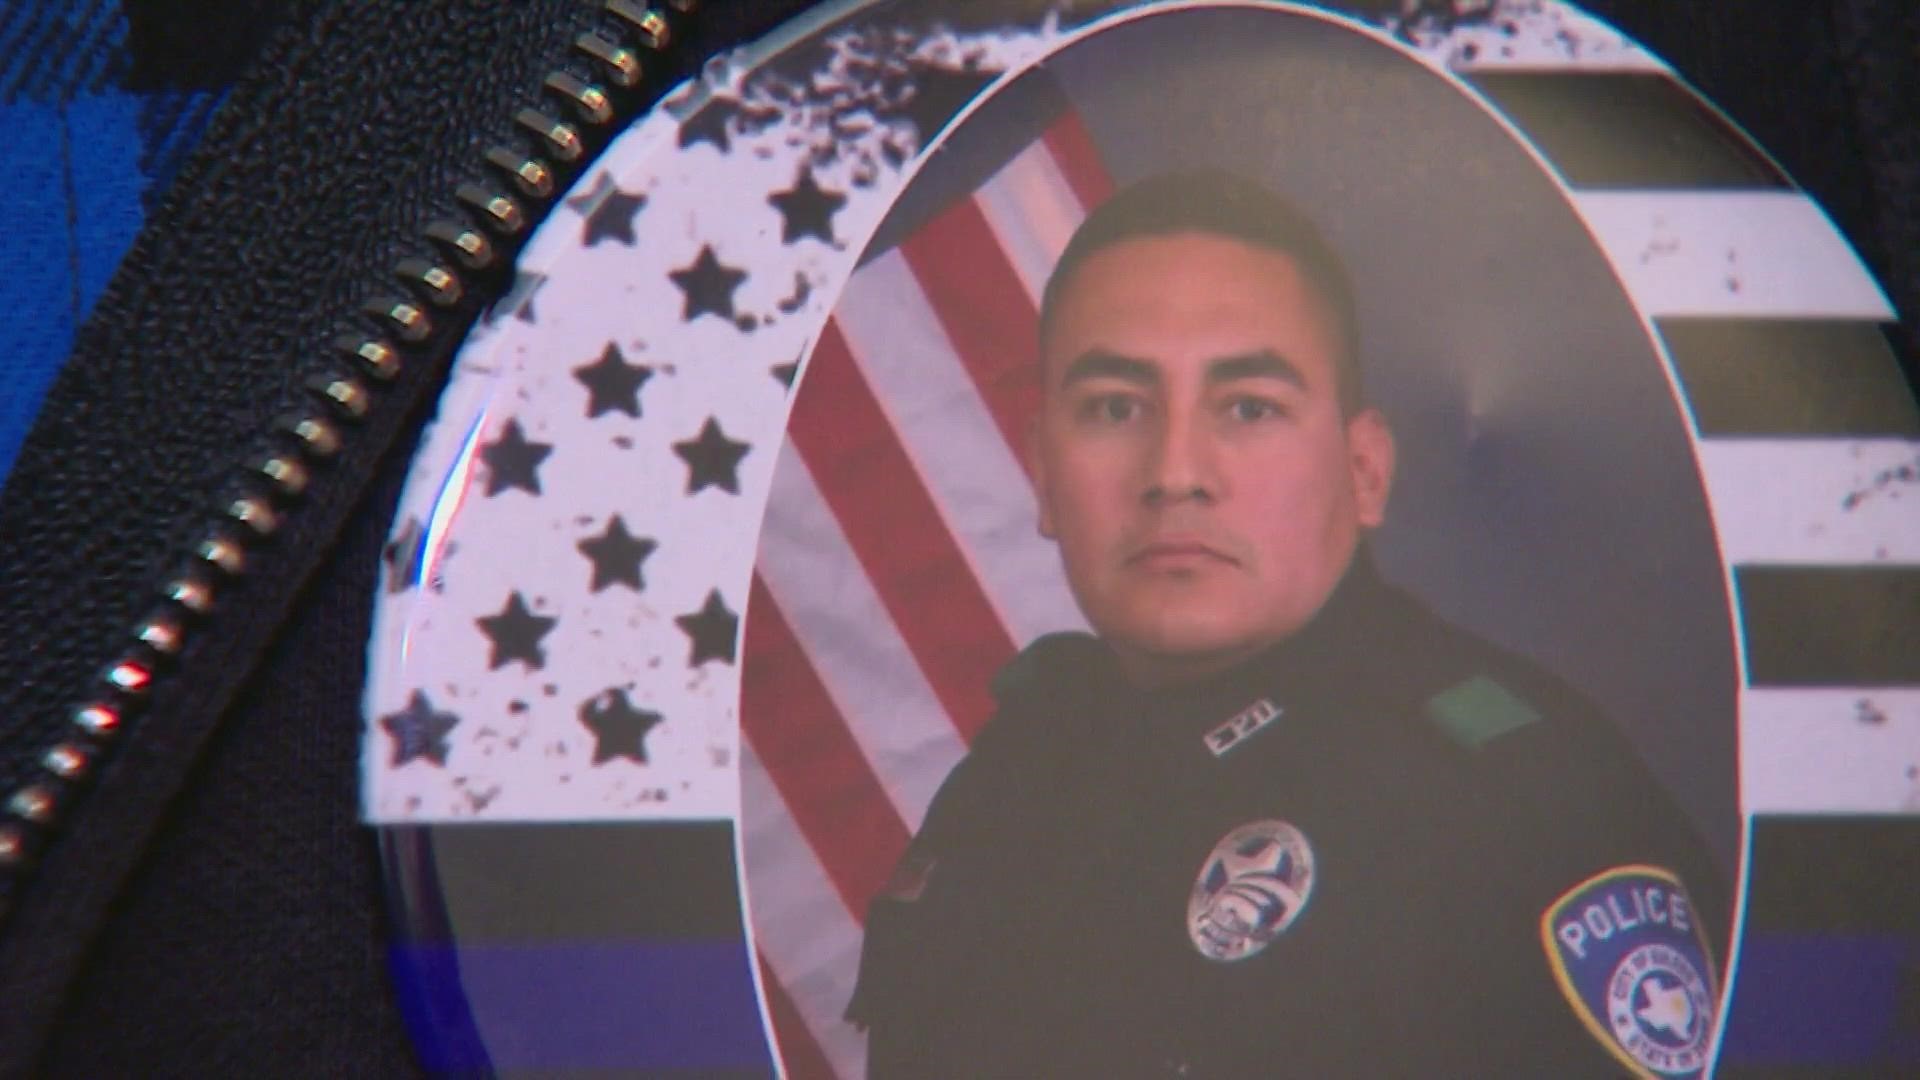 Dylan Molina pleaded guilty to intoxication manslaughter in the death of Euless, Texas, officer Alejandro Cervantes